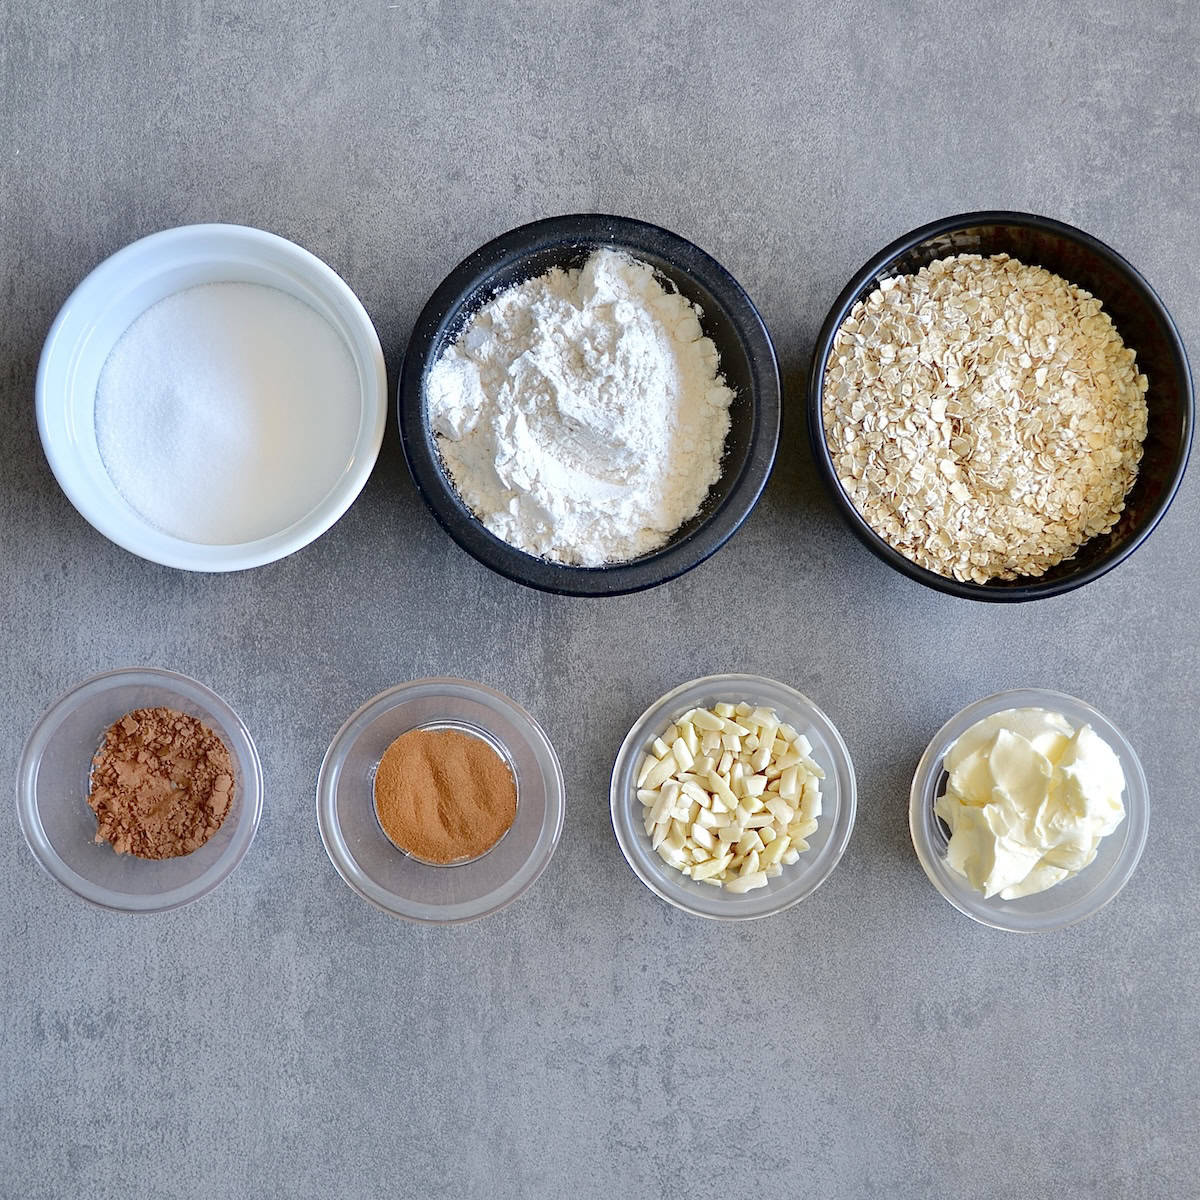 Ingredients for oat streusel topping